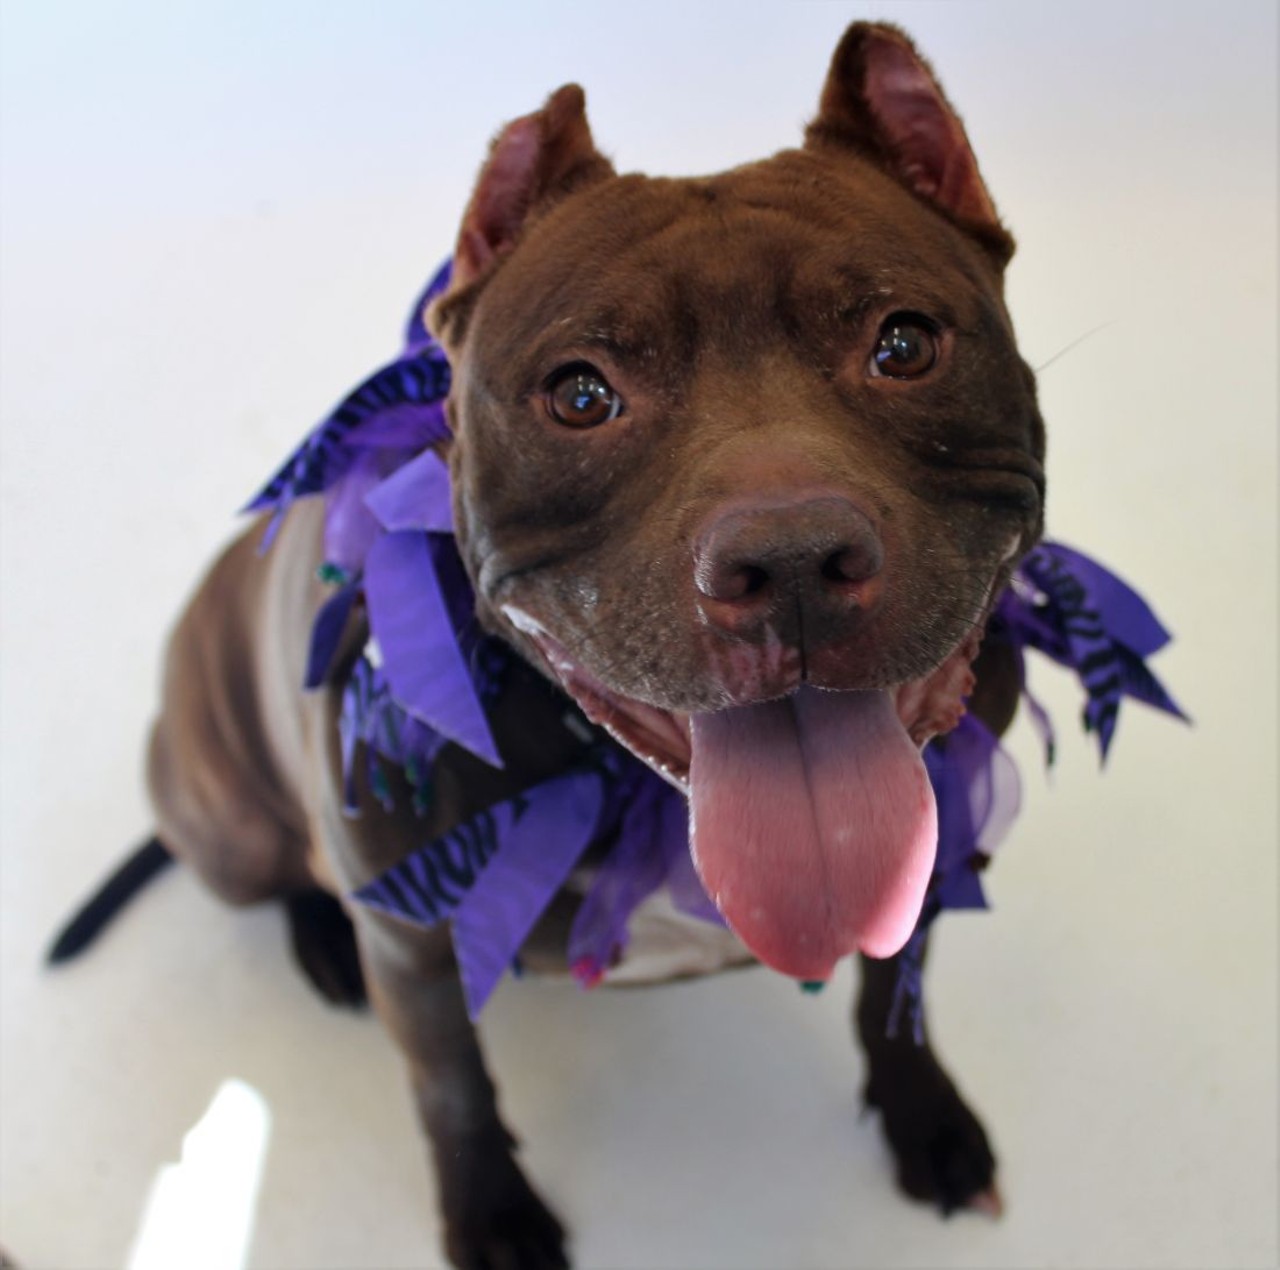 NAME: Brandy
GENDER: Female
BREED: Pit Bull
AGE: 5 years
WEIGHT: 69 pounds
SPECIAL CONSIDERATIONS: None
REASON I CAME TO MHS: Owner surrender
LOCATION: Mackey Center for Animal Care in Detroit
ID NUMBER: 869350